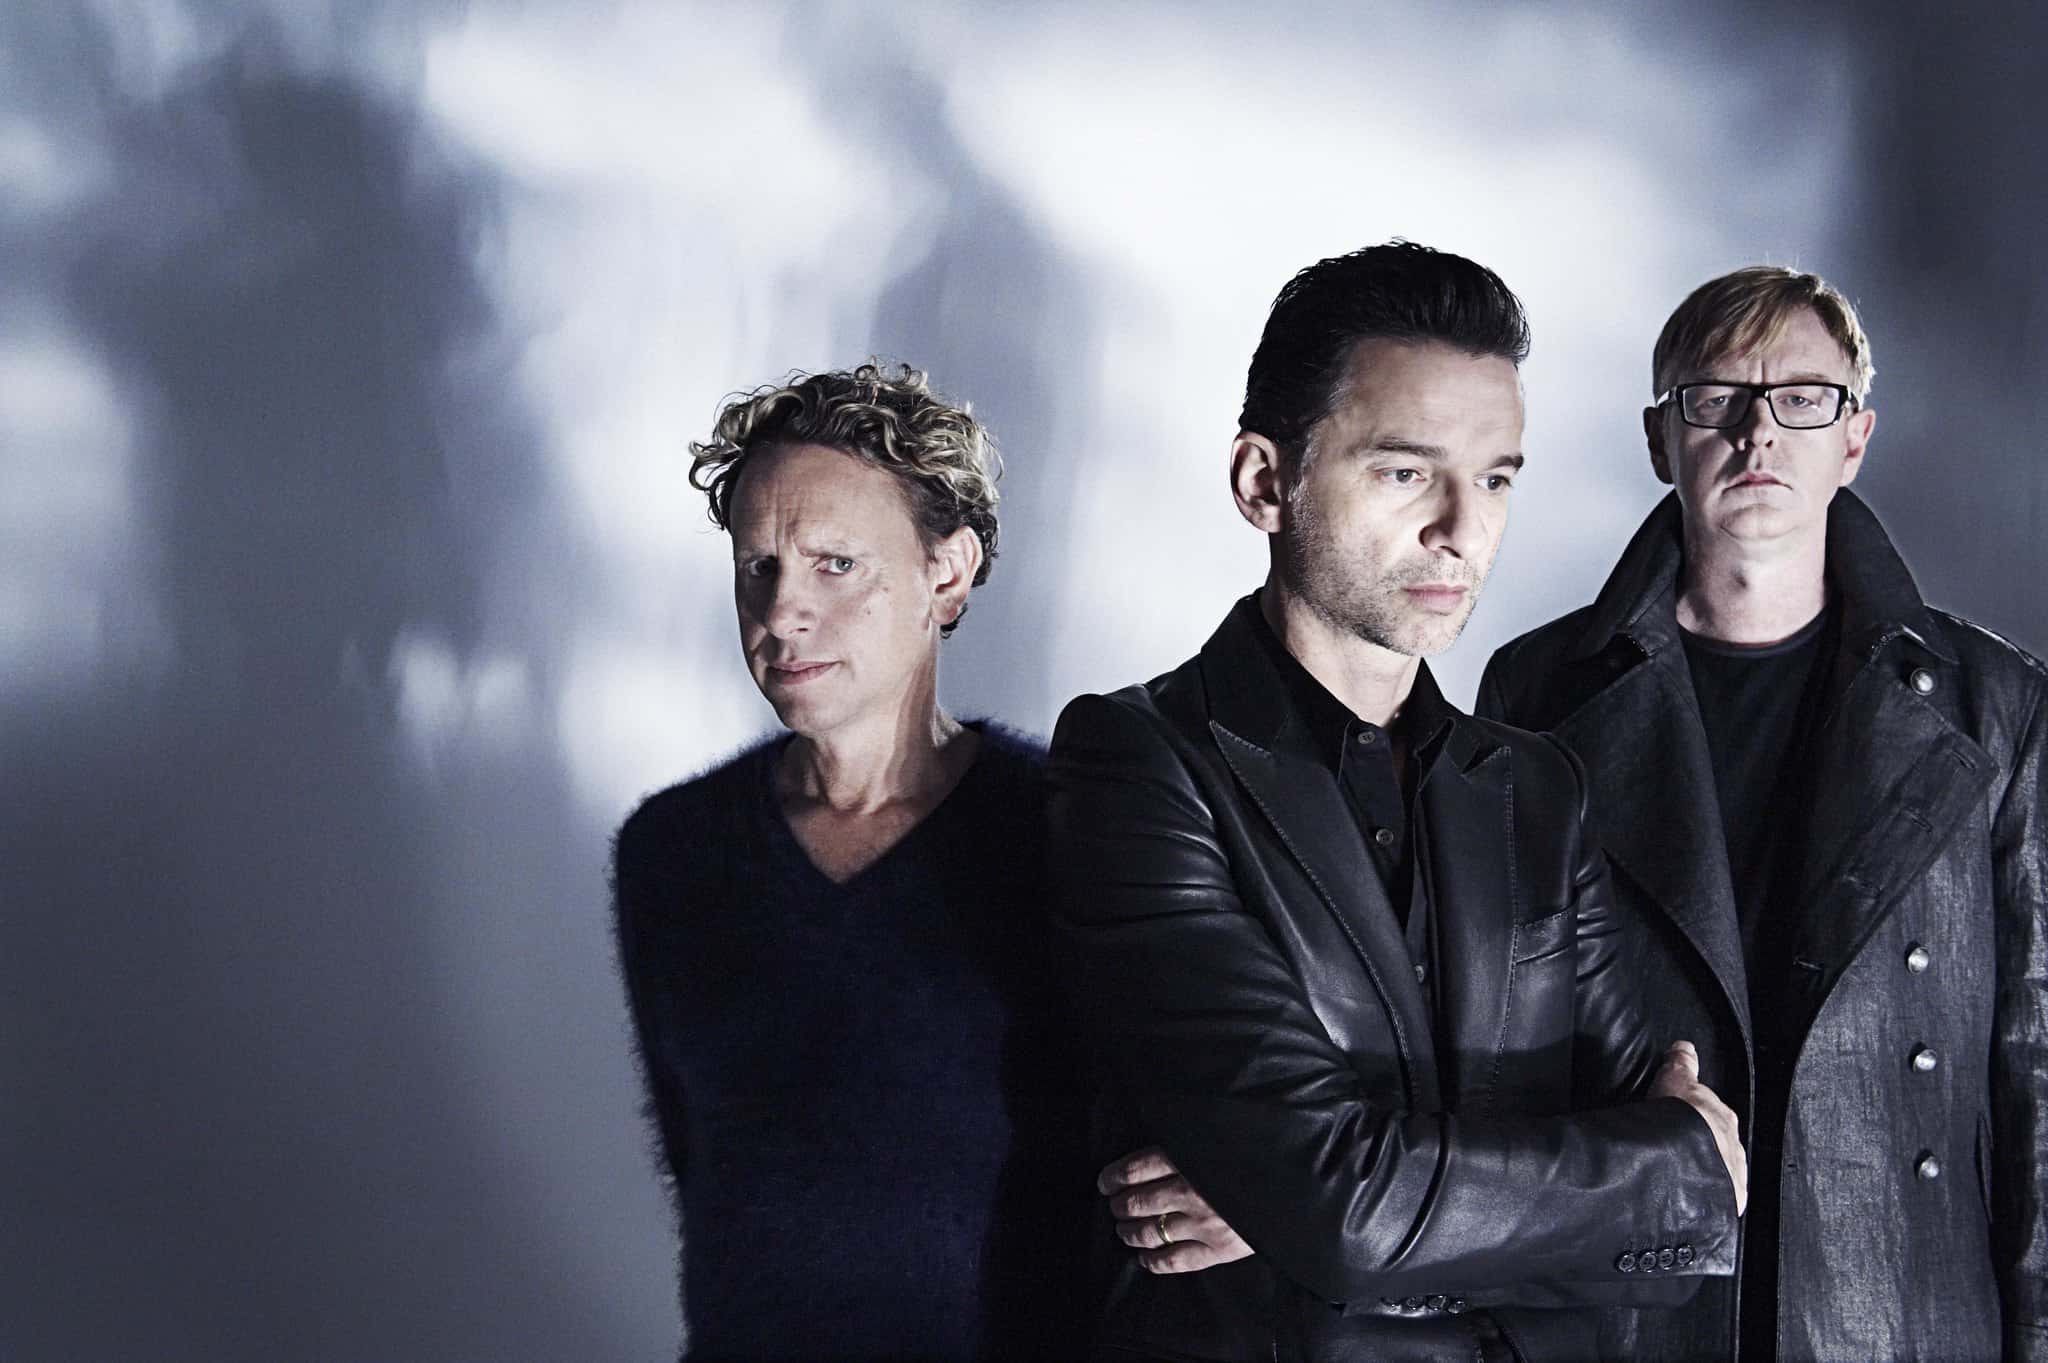 Depeche Mode perform on The Late Show with Stephen Colbert ahead of upcoming tour